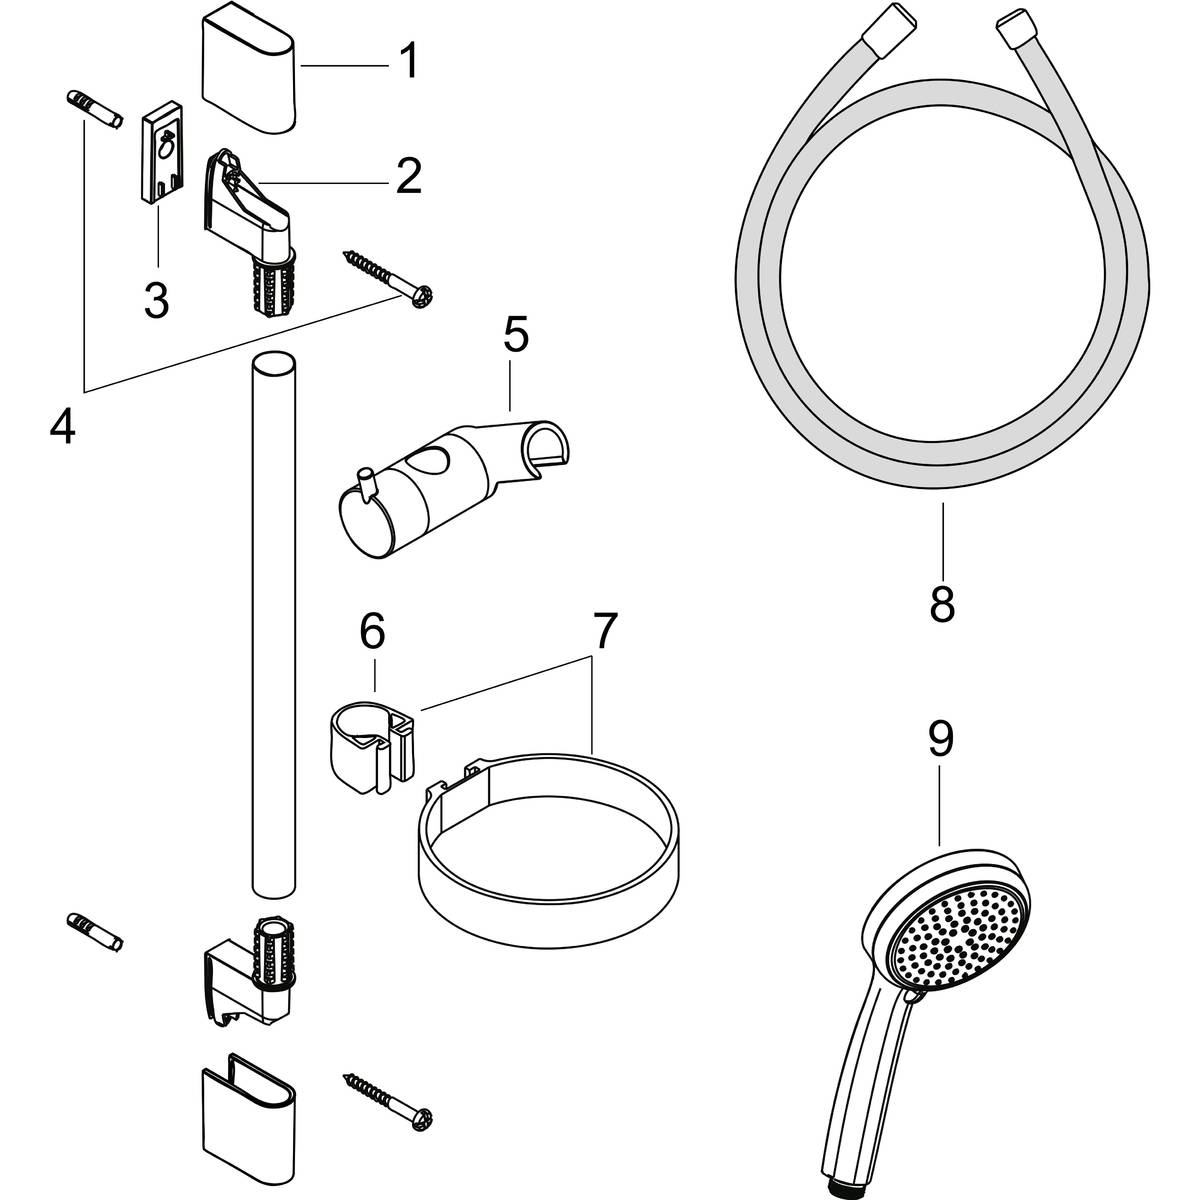 Sociale wetenschappen vervangen Rot hansgrohe Wall bar sets: Croma 100, Shower set Vario with shower bar 65 cm  and soap dish, Item No. 27772000 | hansgrohe INT